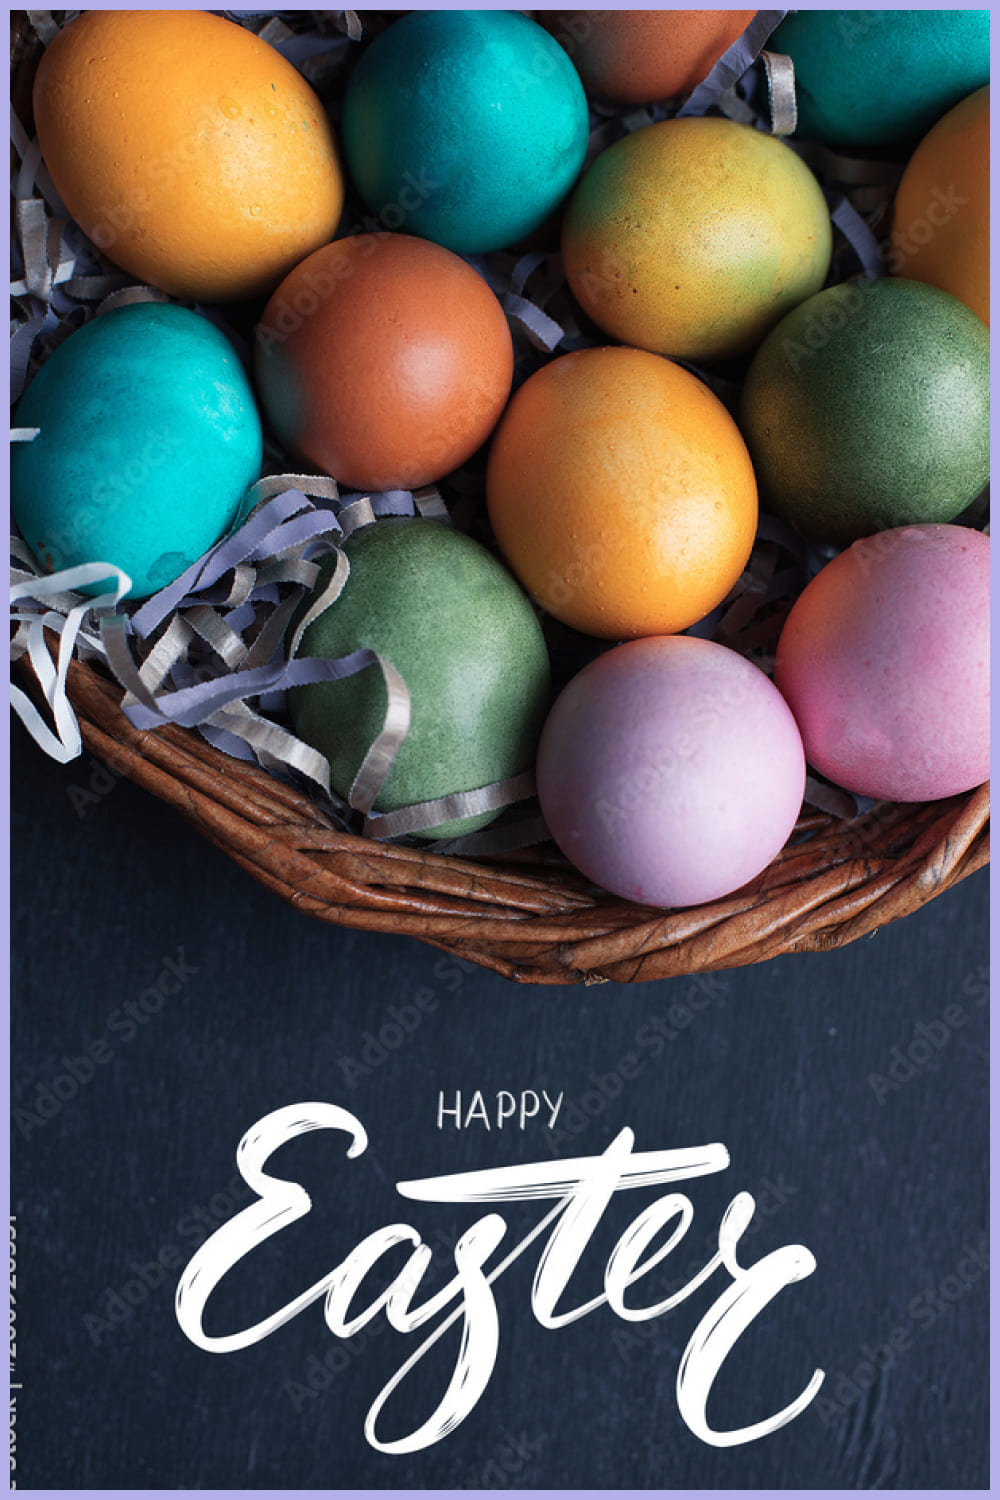 Happy Easter hand lettering inscription and colorful easter eggs in basket on black wooden background.